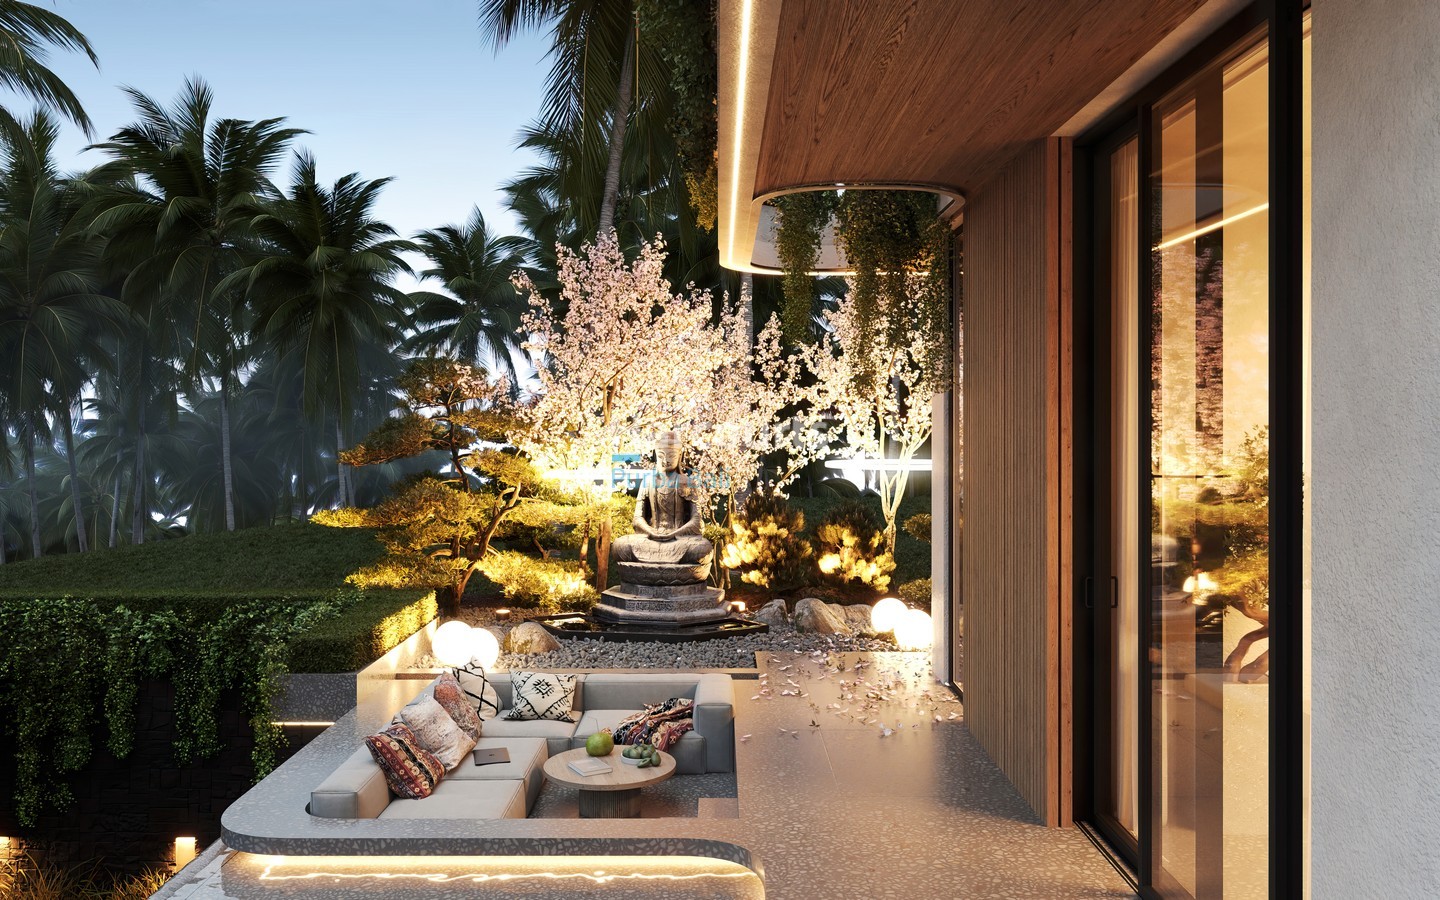 Invest in this stunning Off-Plan Fully-Serviced Property in Bali's Bukit